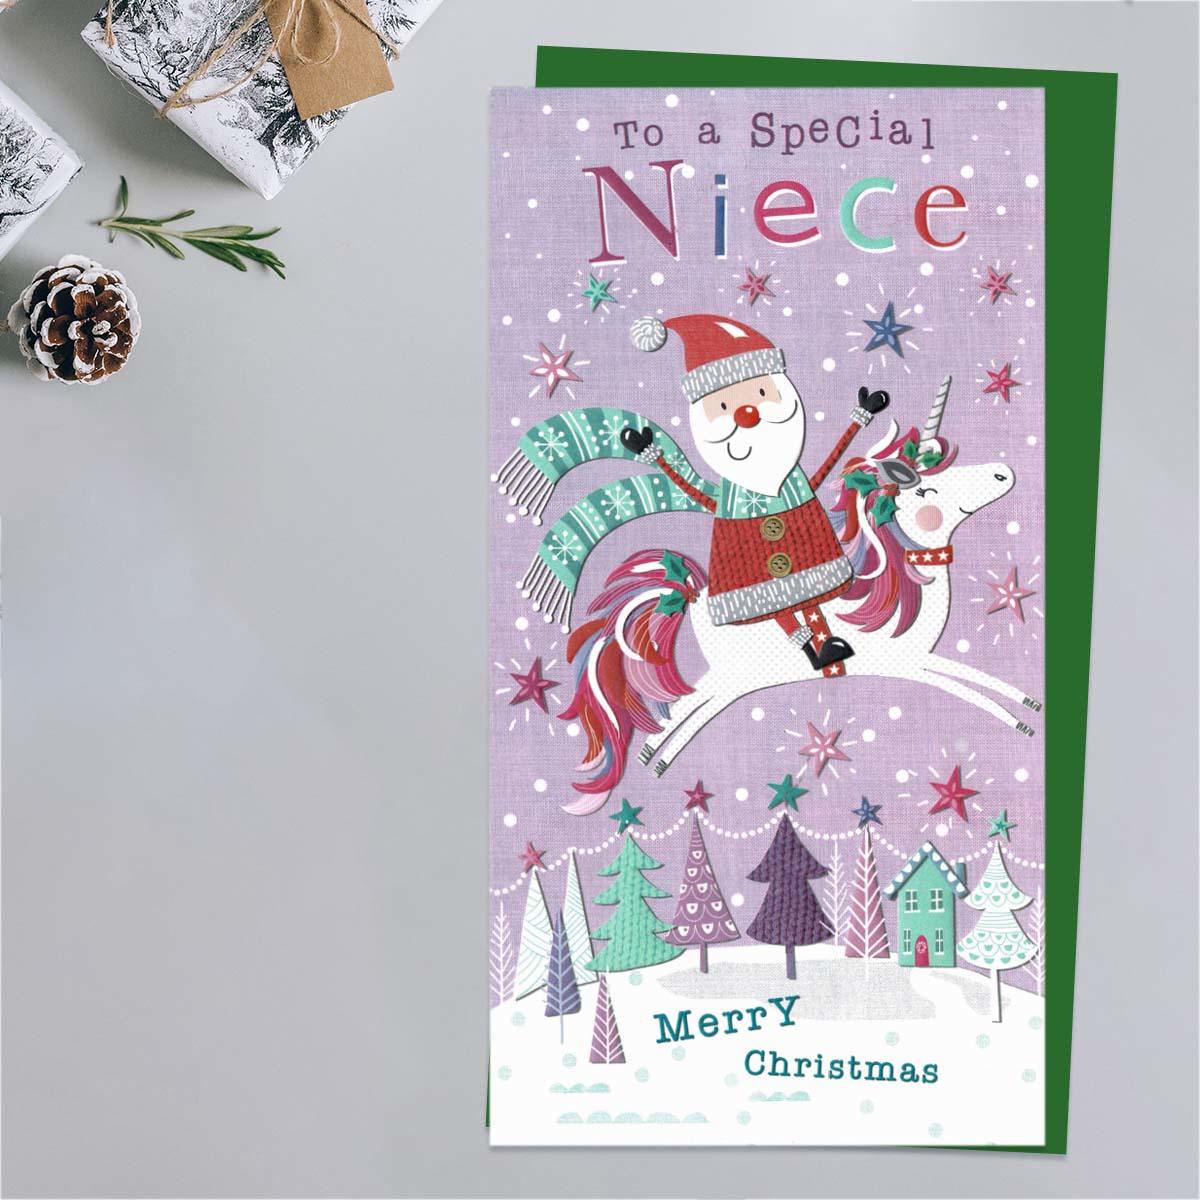 Niece Christmas Card Alongside Its Red Envelope